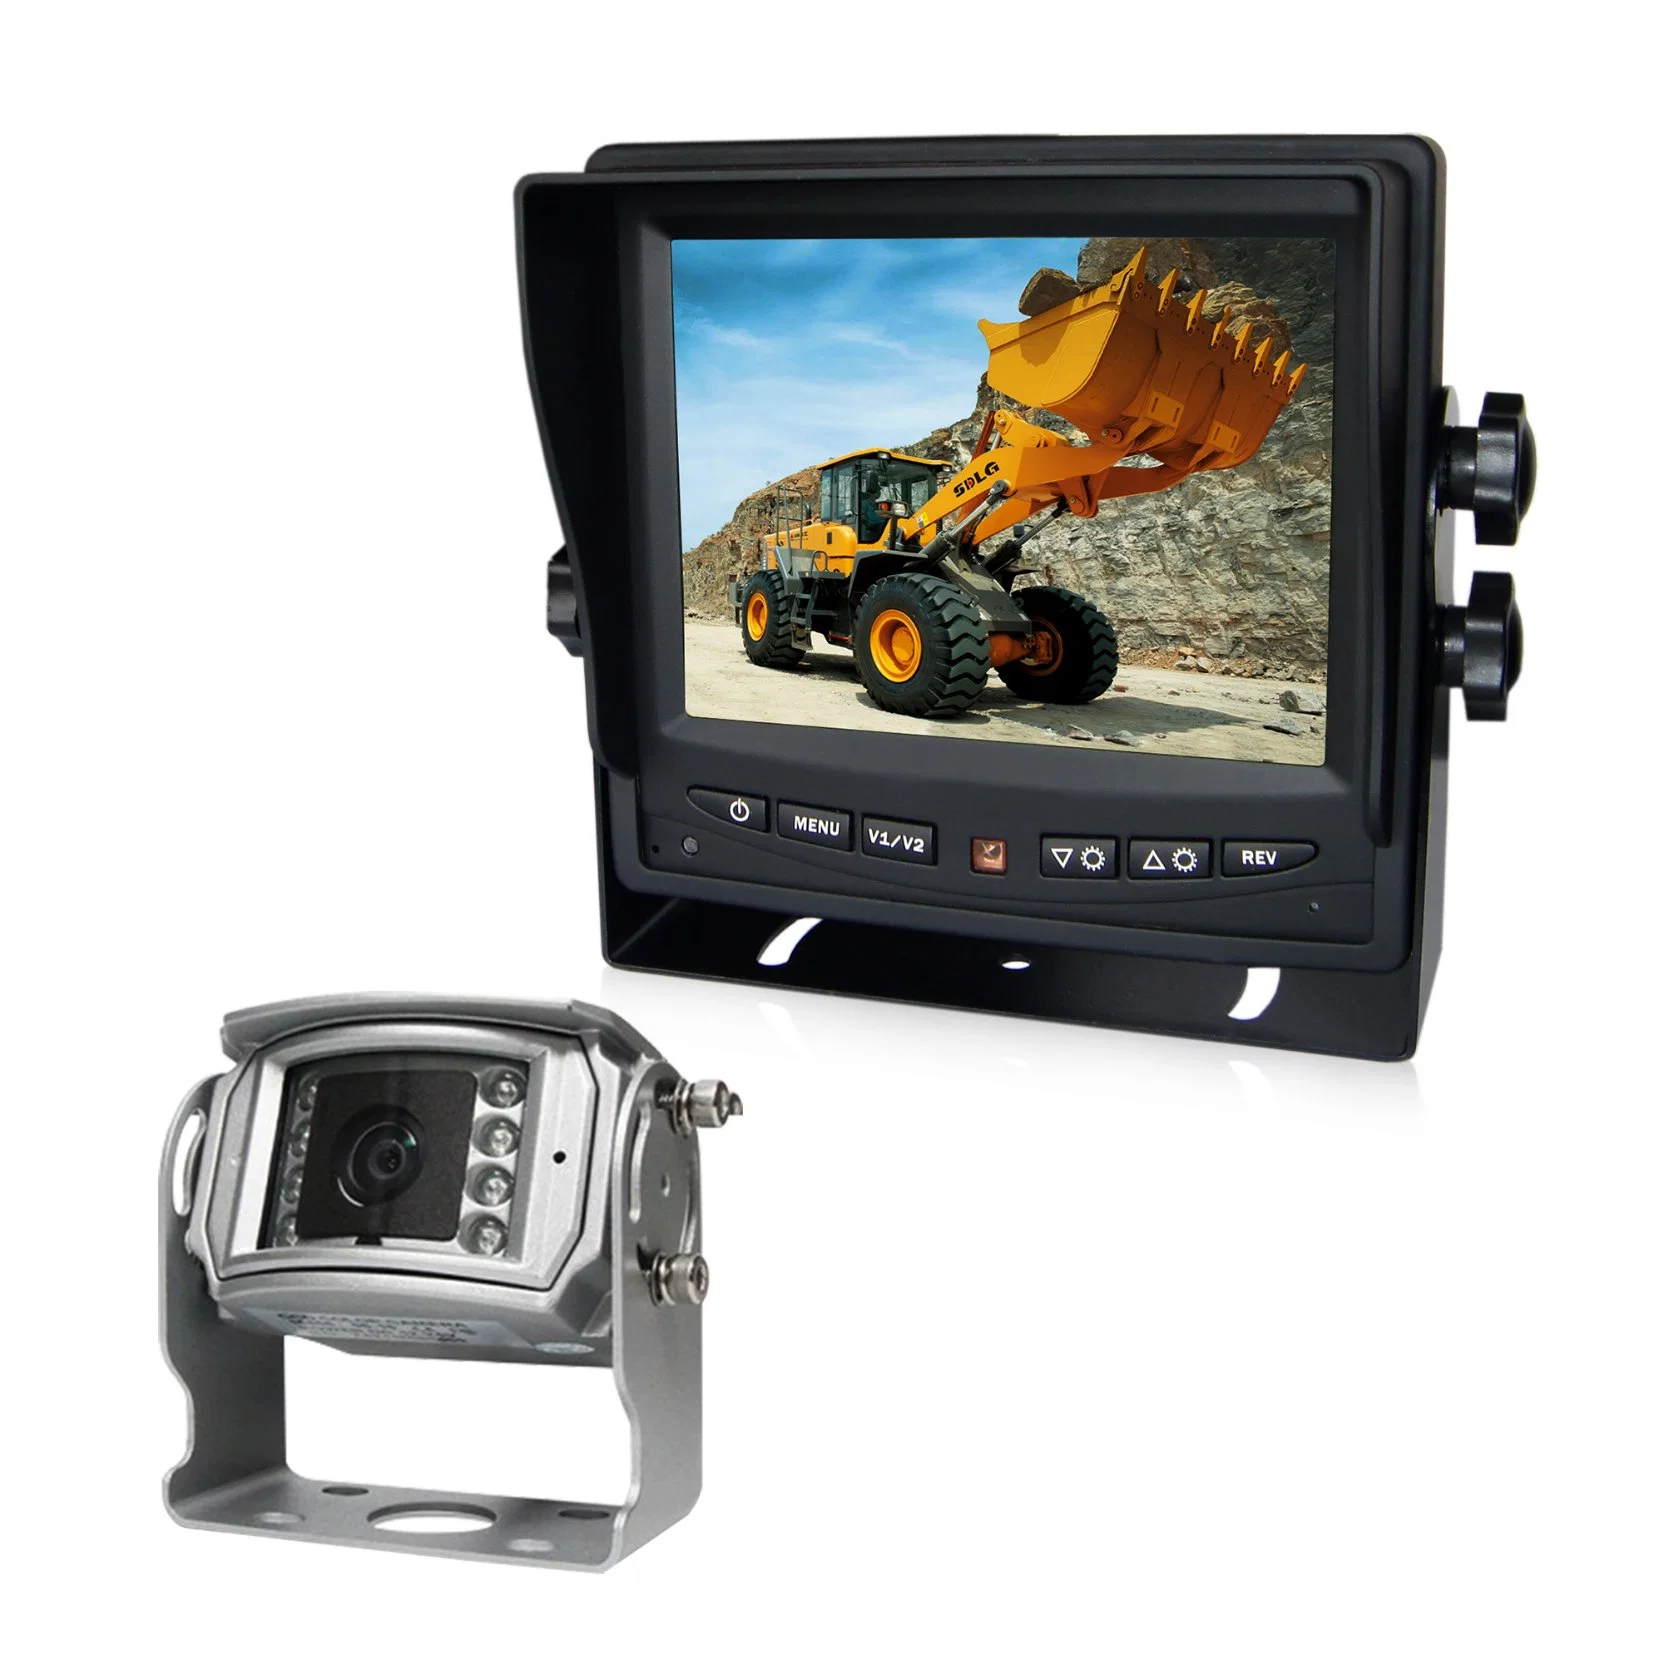 5.6 Inch Rear View Car Safety Monitor Camera System